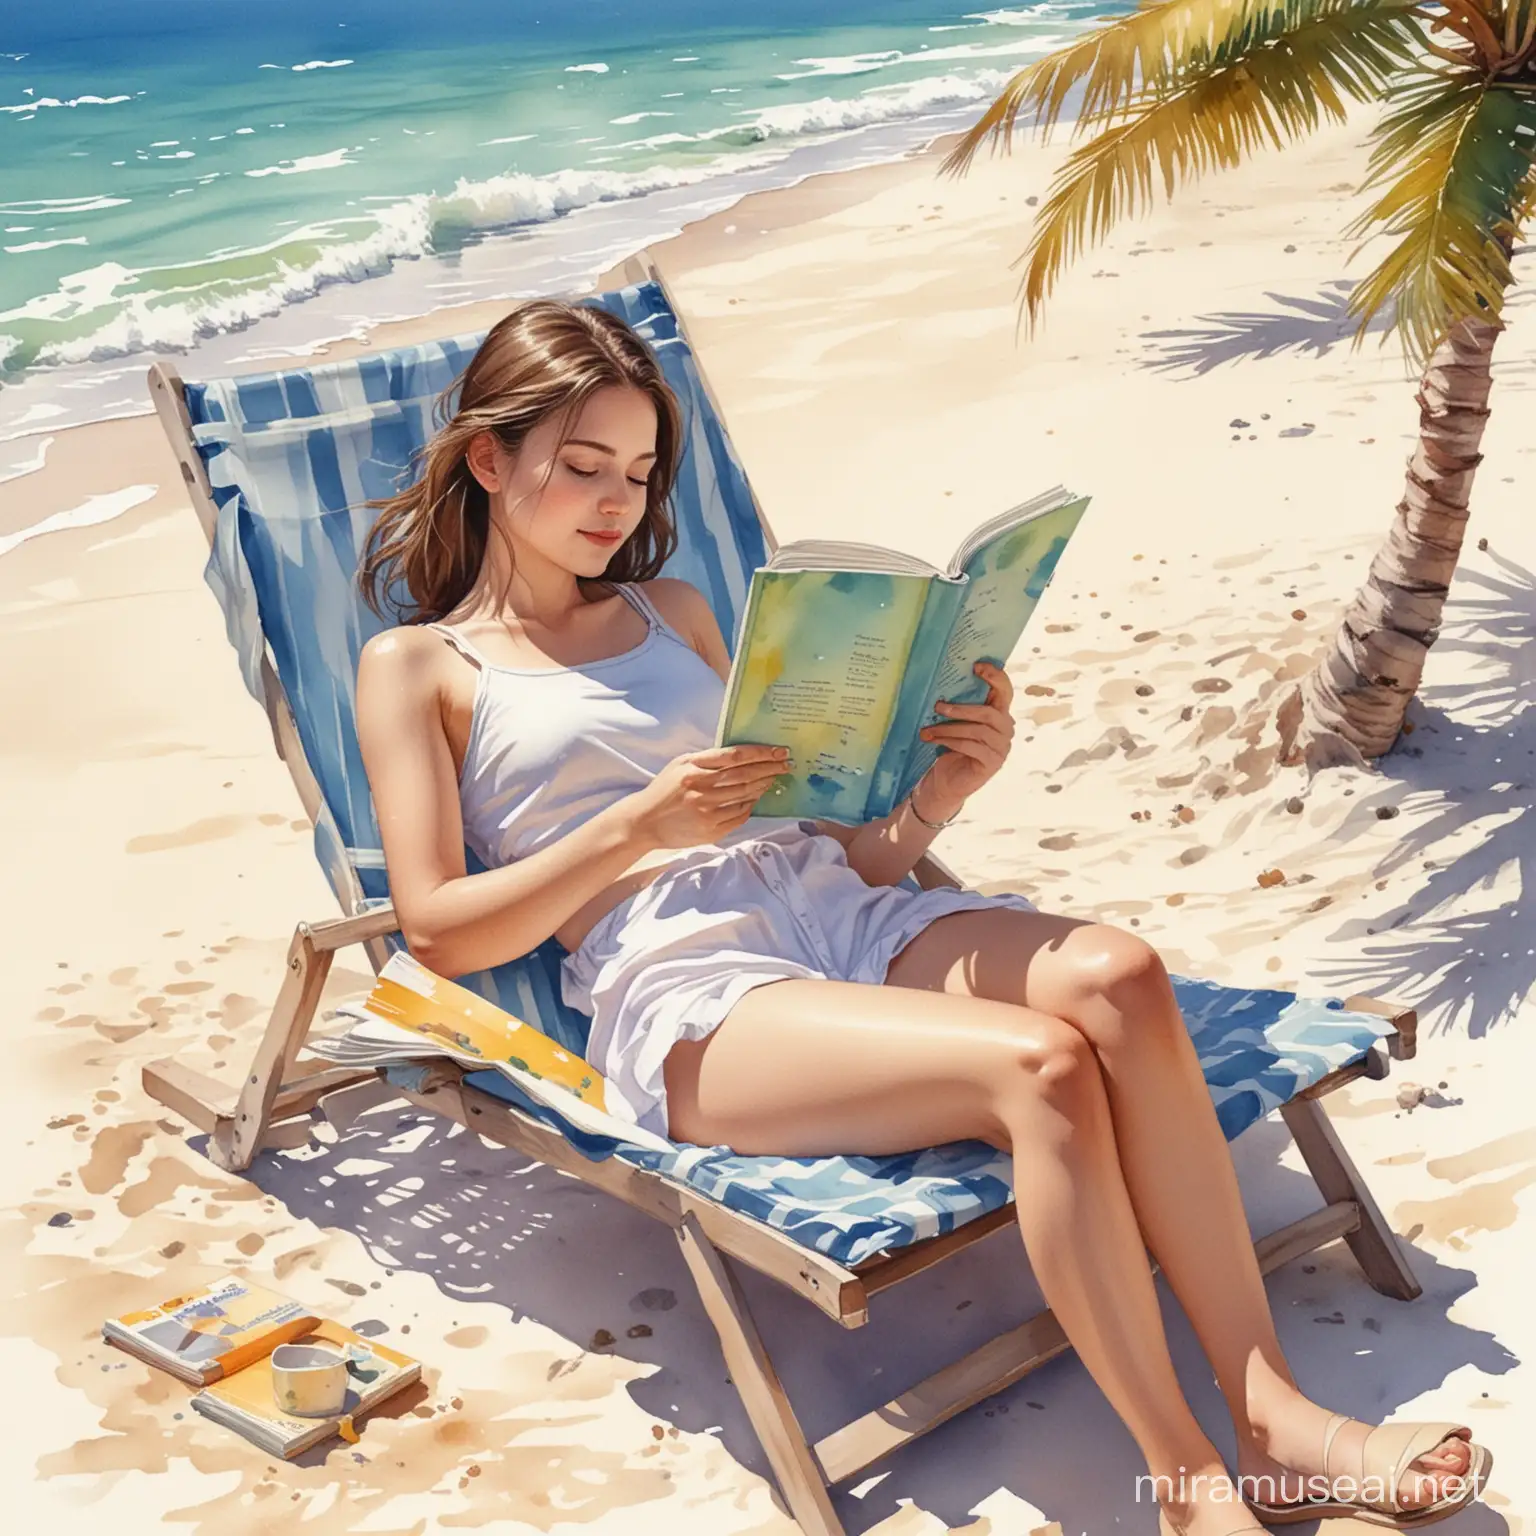 Girl sleeping on beach chair in center holding book in both hands, reading book, watercolor paint format, sunny beach setting, detailed facial features, high quality, watercolor painting style, detailed book cover, book in center 